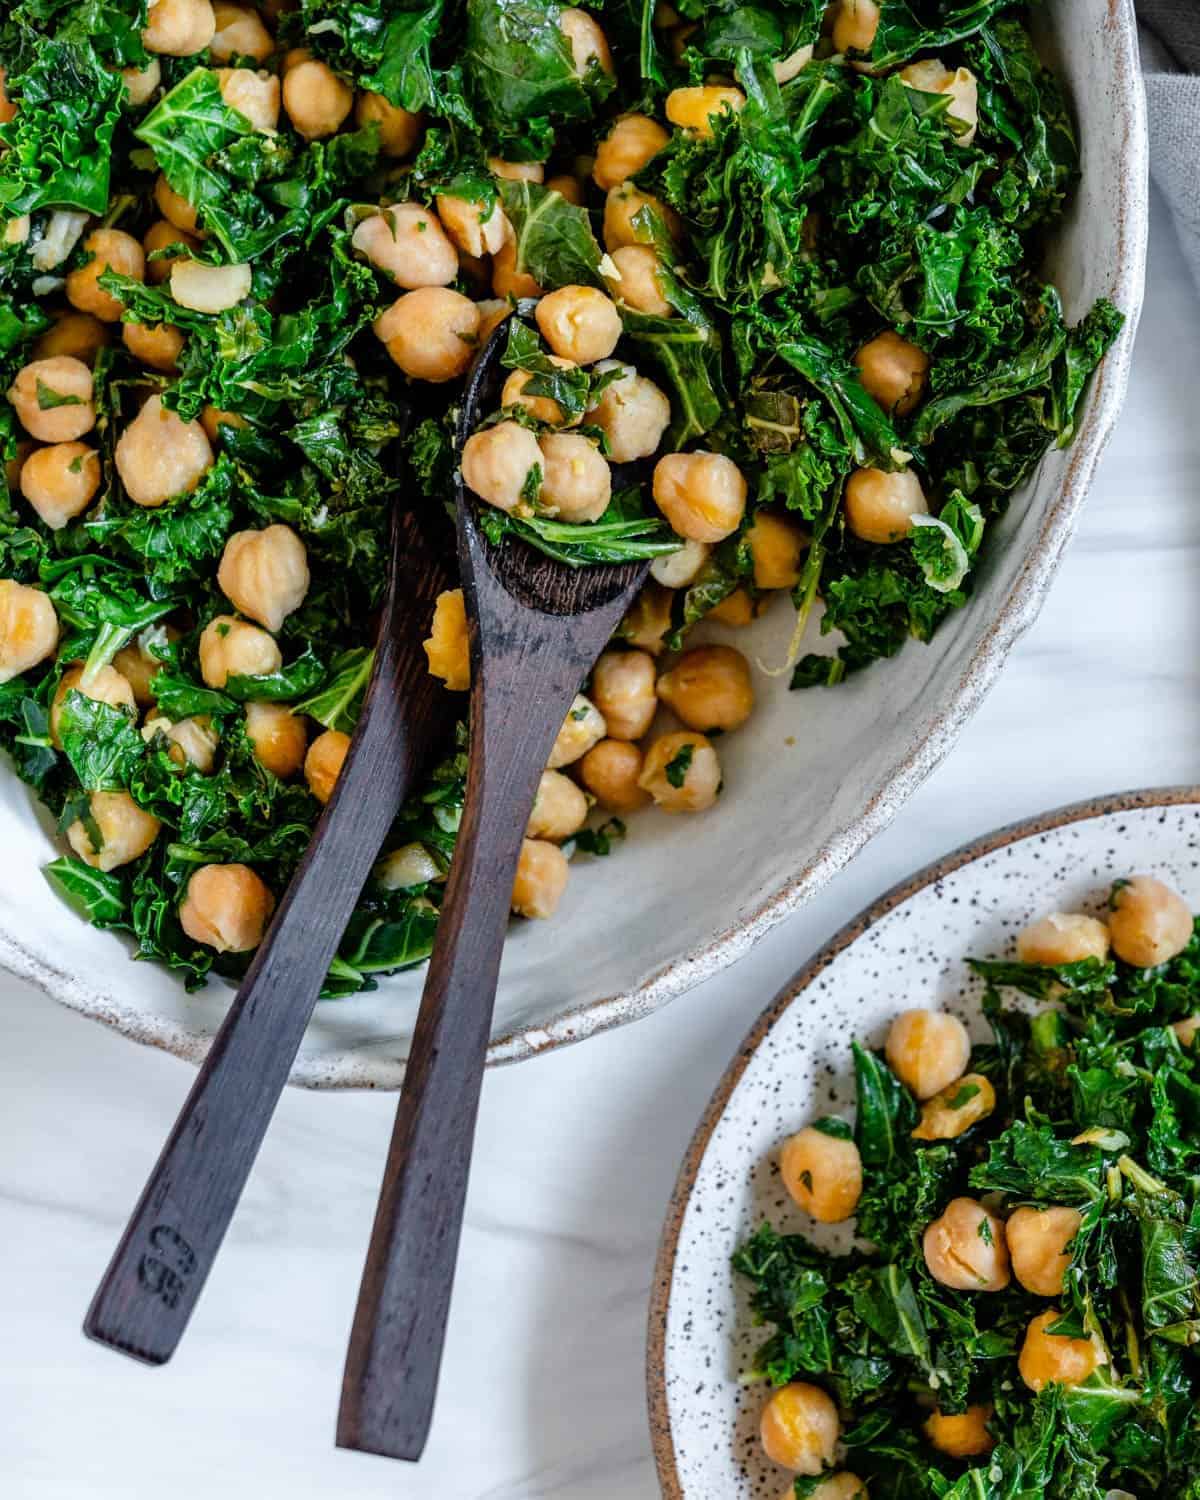 completed Garbanzo Bean Kale Salad plated on a platter and plate against a white background with serving utensils in the salad